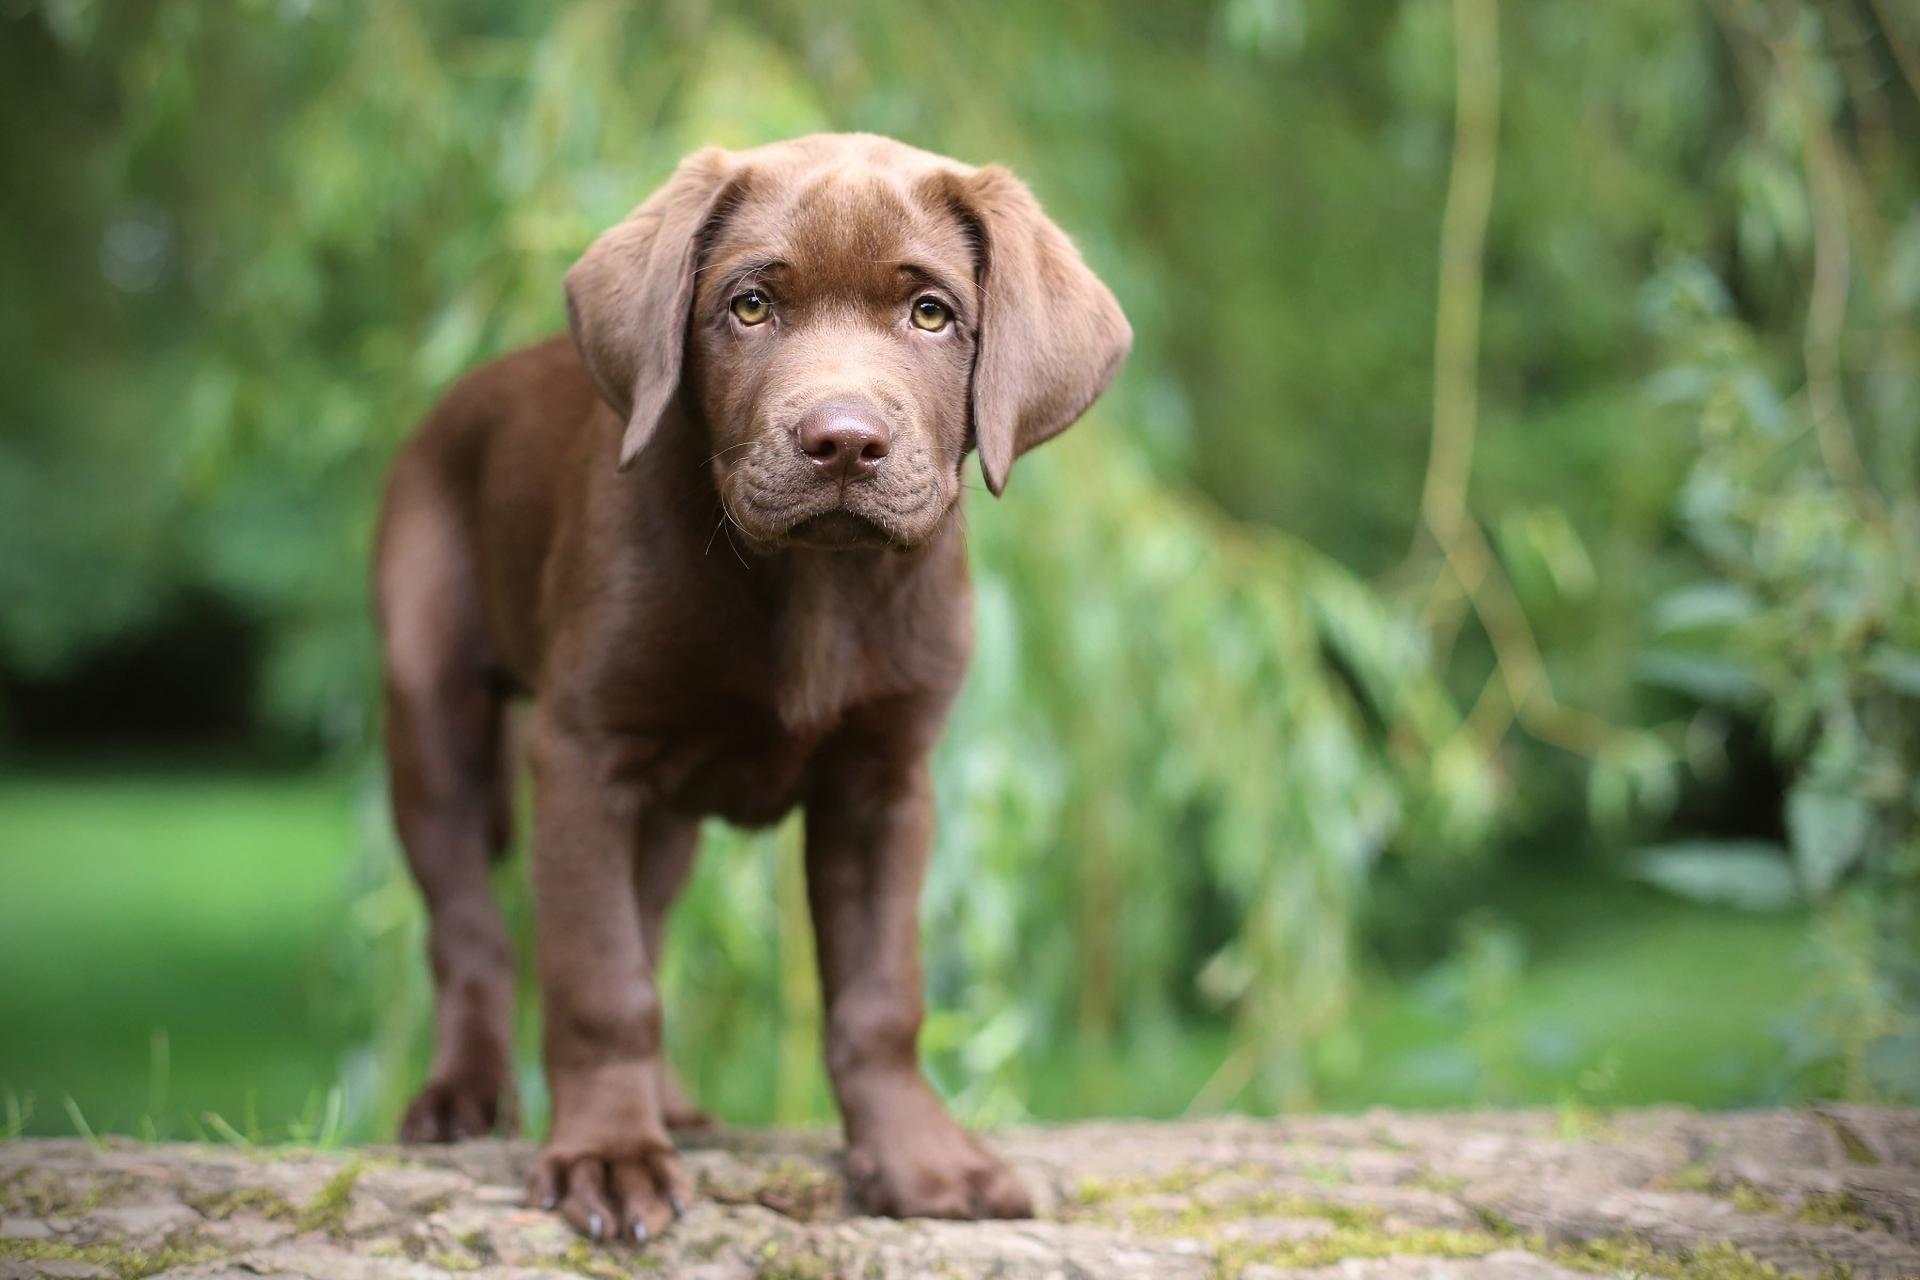 Chocolate Lab Puppy Wallpaper Background Image. View, download, comment, and rate. Chocolate lab puppies, Lab puppy, Dog heaven